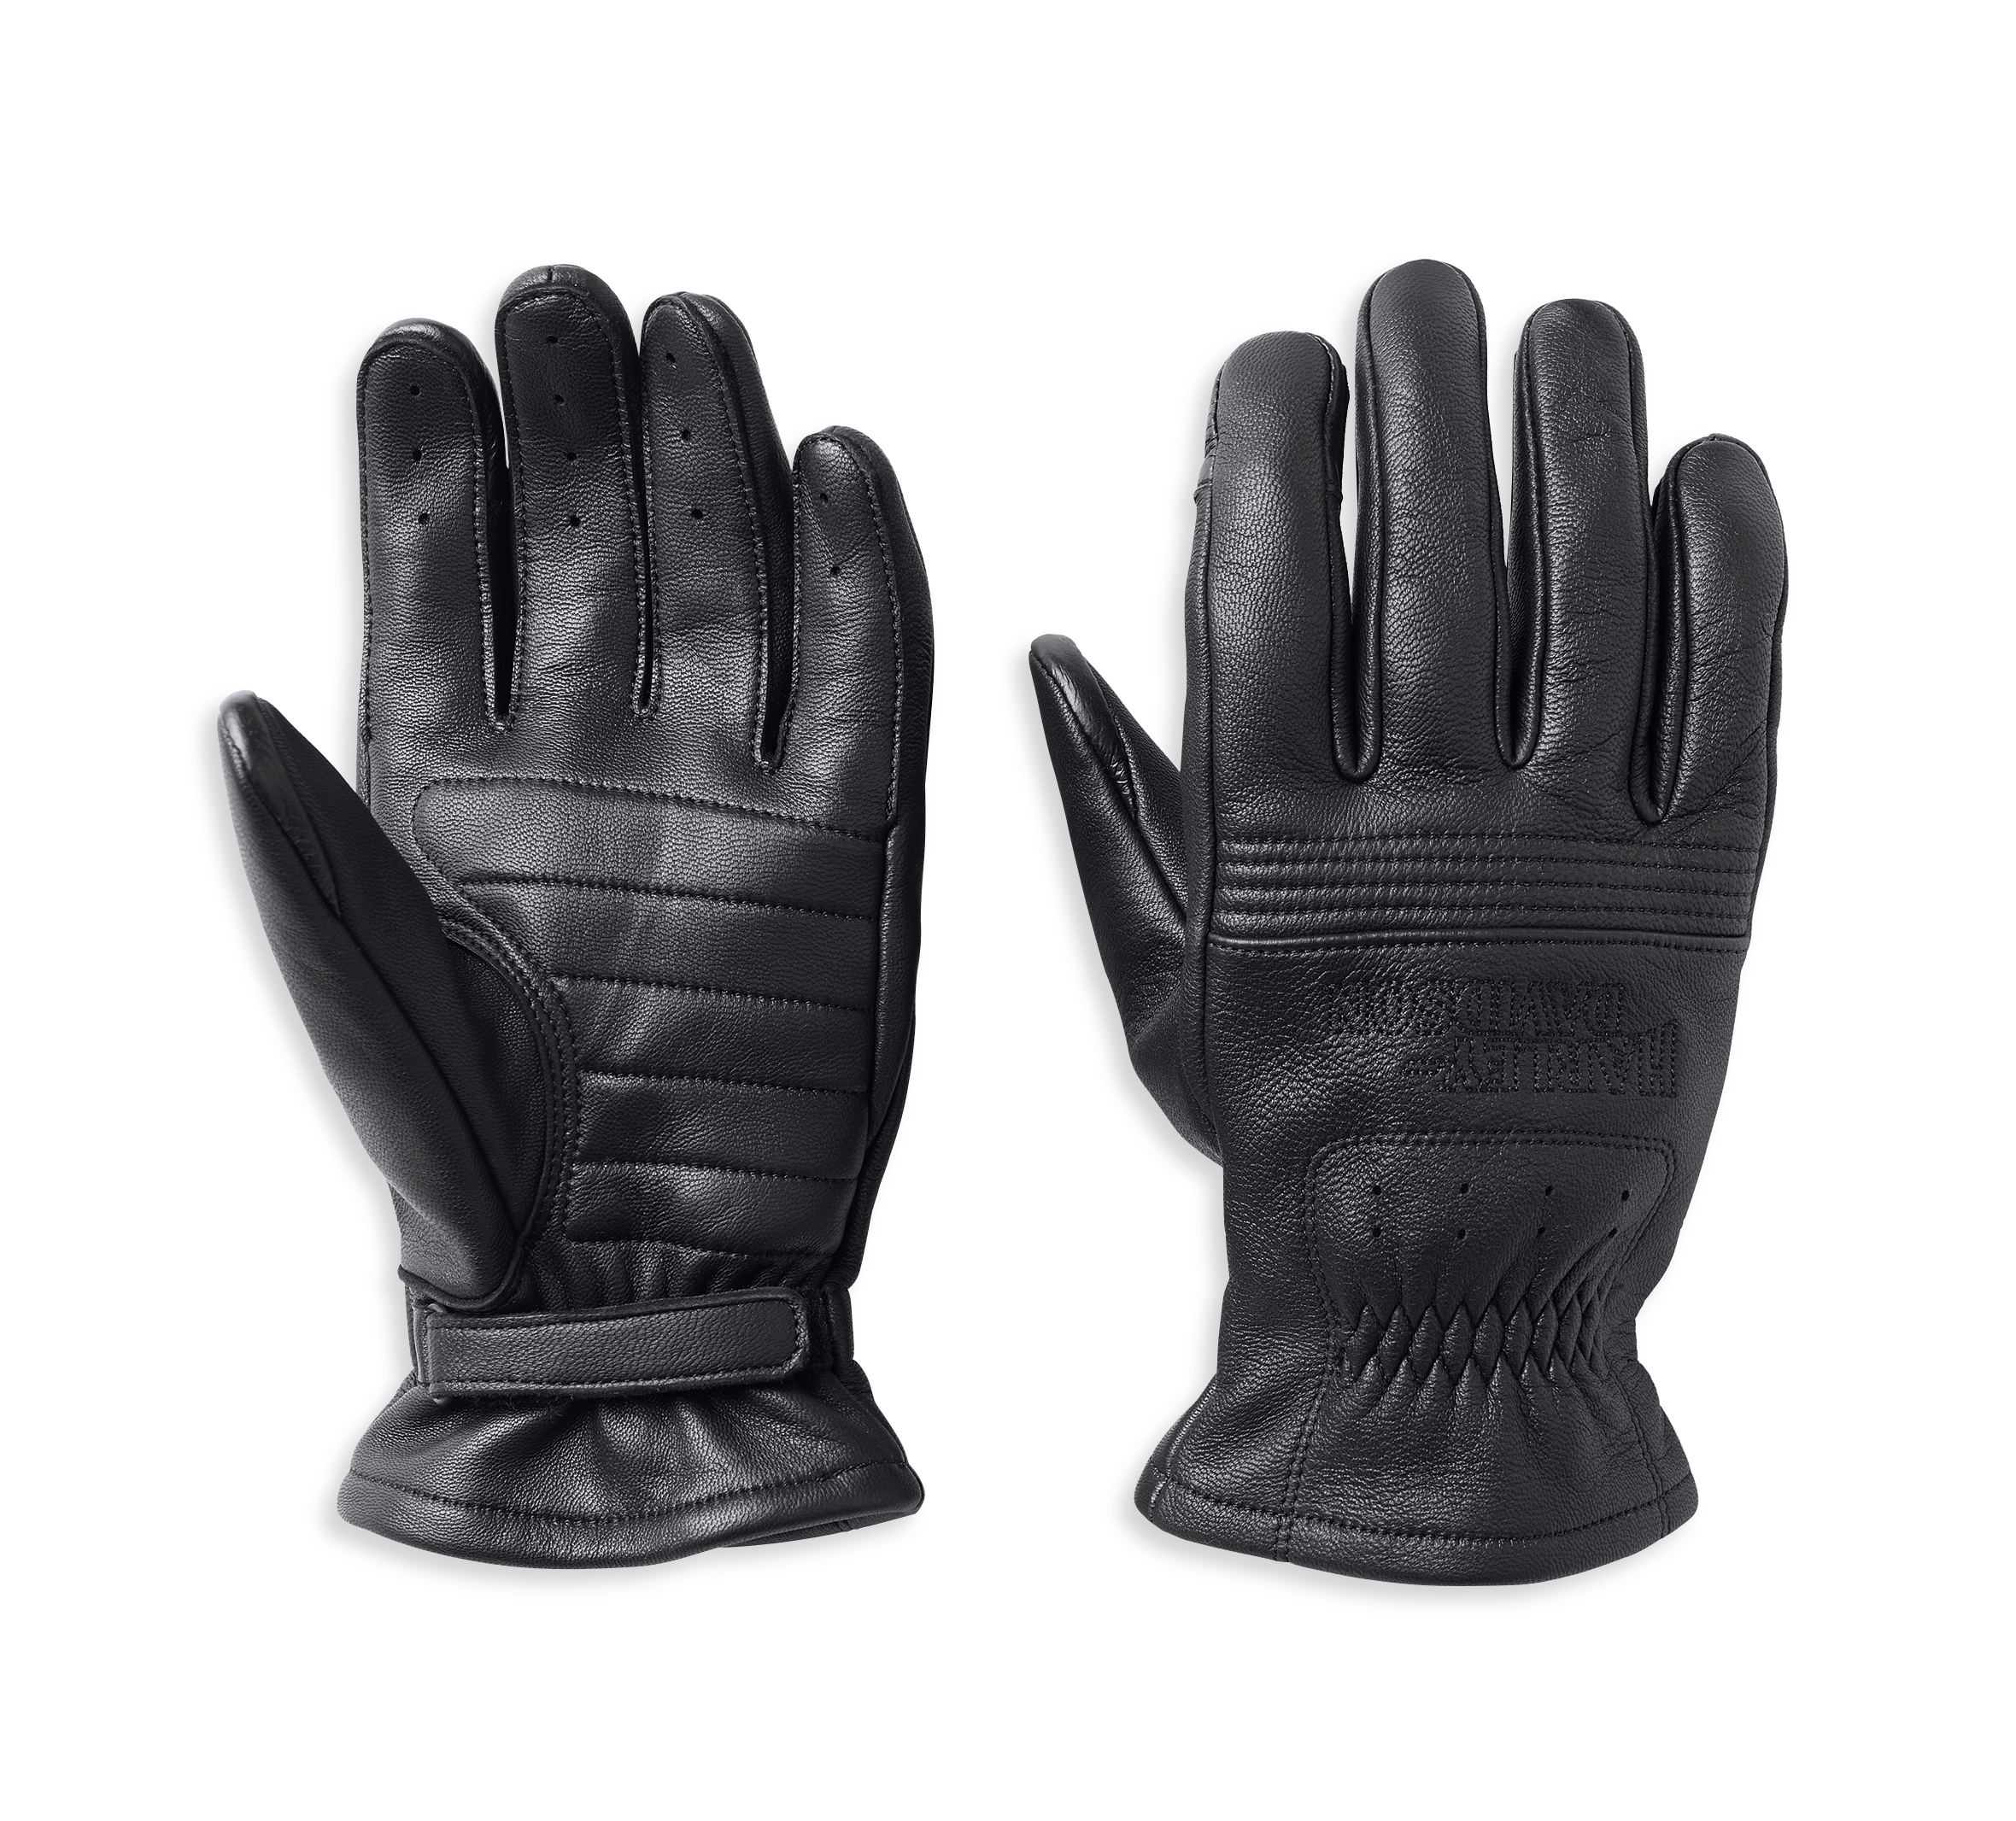 MEN LEATHER GLOVE DRIVING RIDING BIKING FASHION TOP QUALITY SOFT LEATHER PRODUCT 